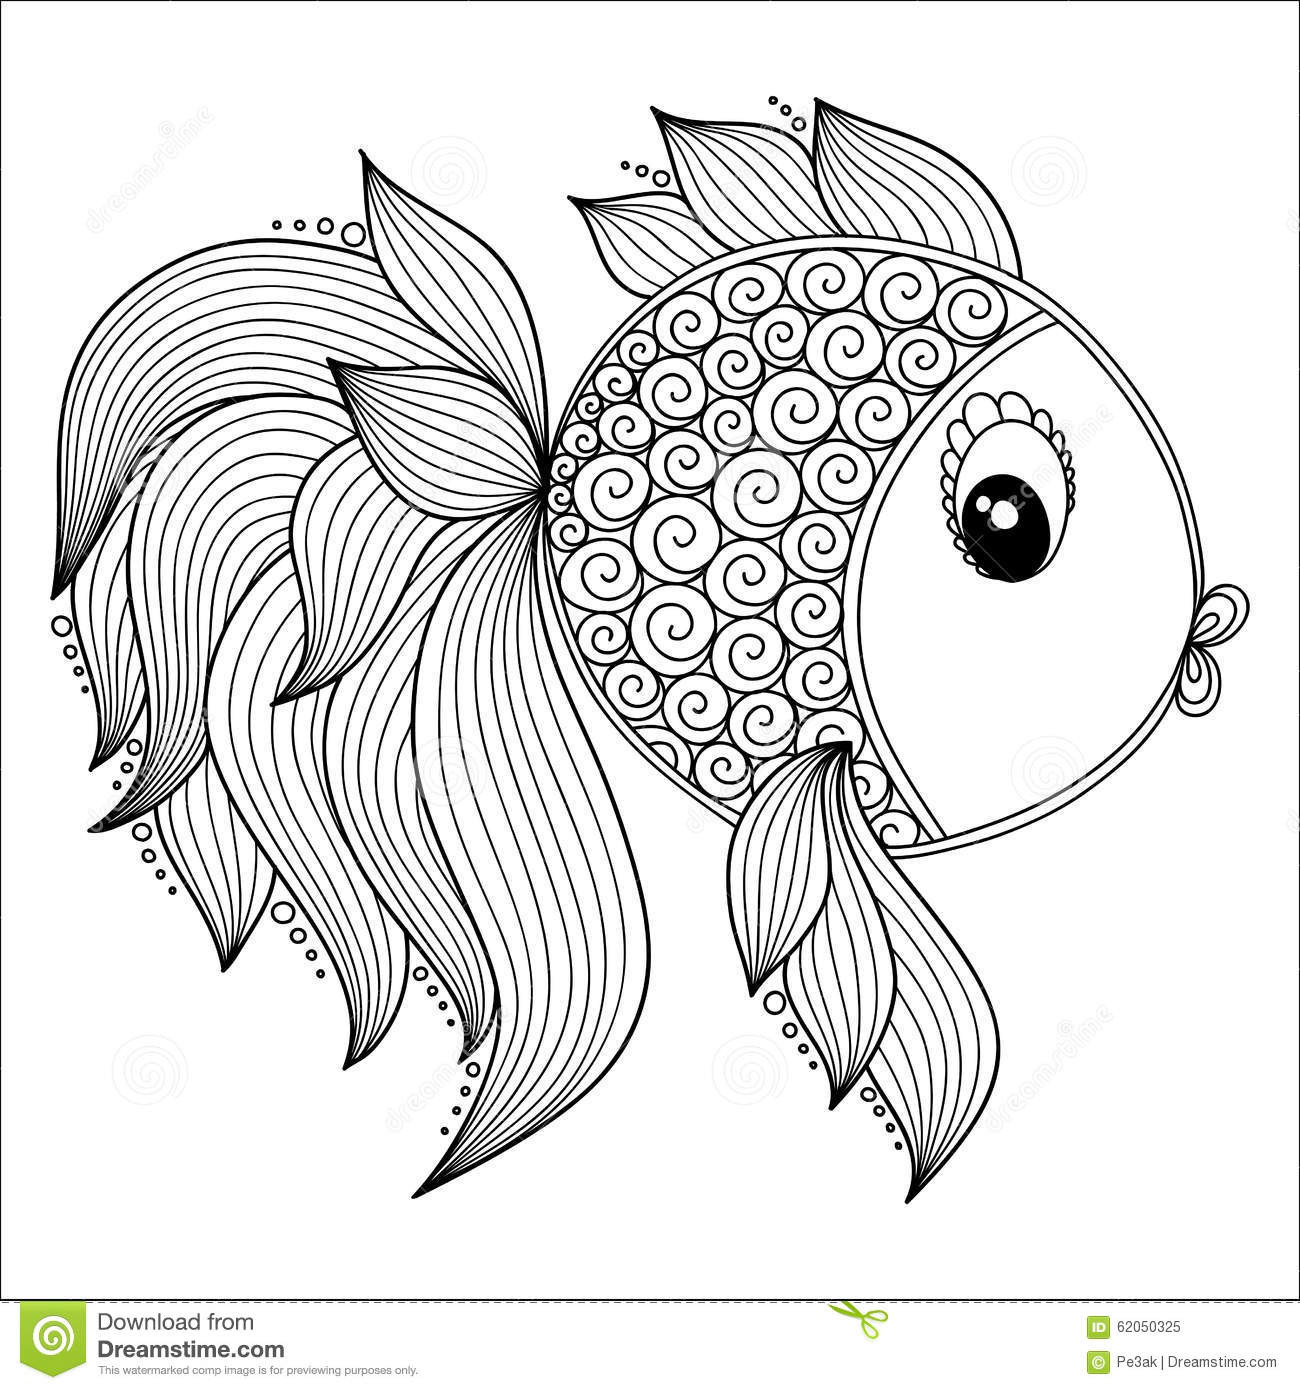 Cute Animal Coloring Pages For Adults
 Pattern For Coloring Book Cute Cartoon Fish Stock Vector